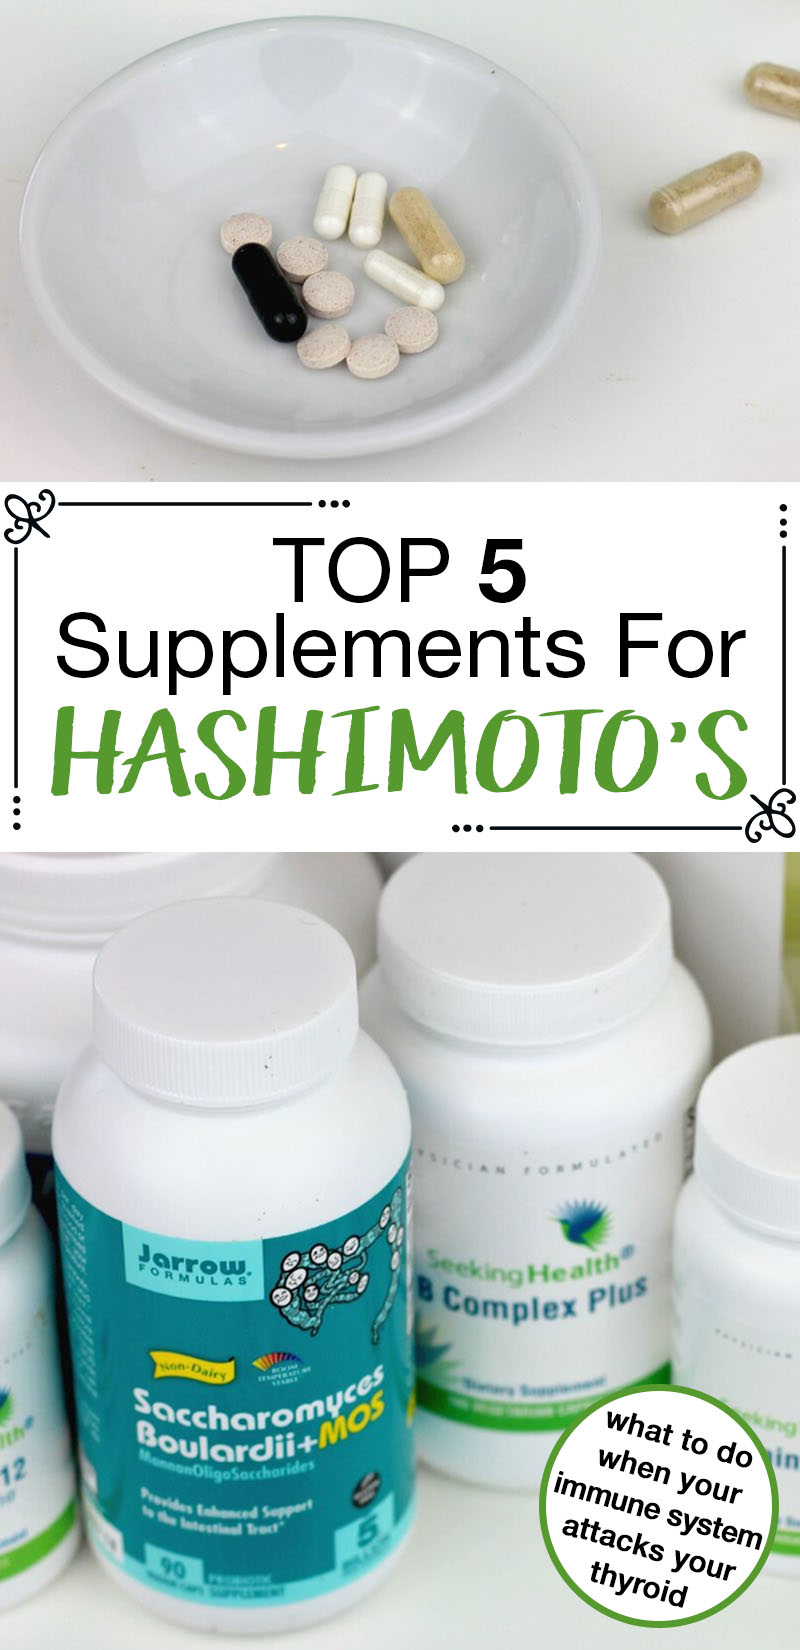 Bottles of supplements sitting on a counter. A bowl of supplement pills with text overlay "Top 5 Supplements for Hashimotos".